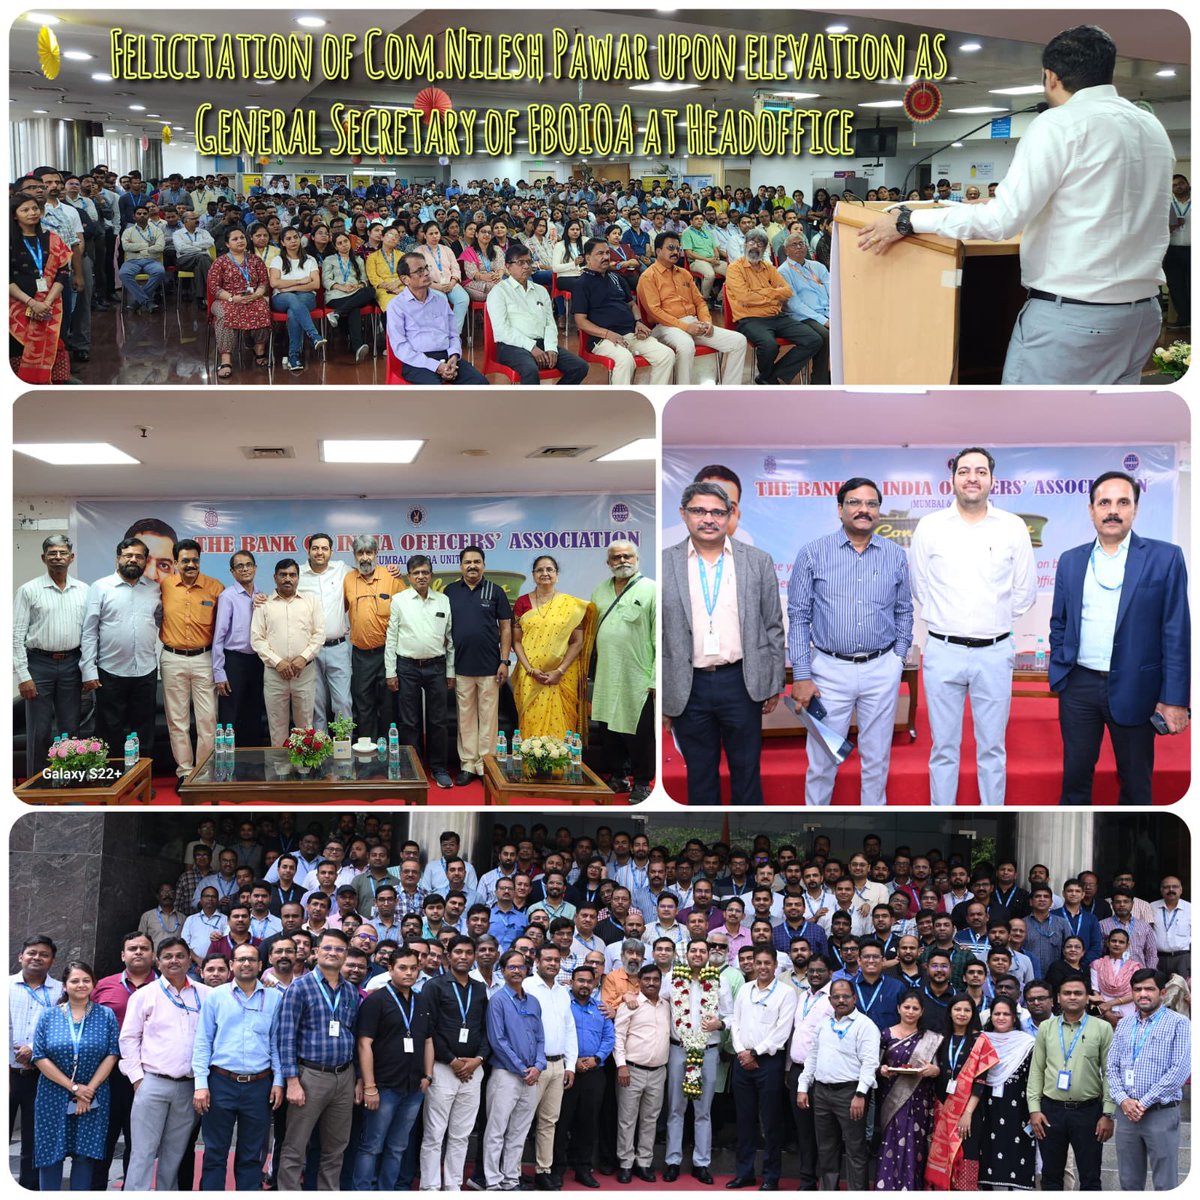 Some Glimpses of felicitation of Com. Nilesh Pawar upon elevation as General Secretary of Federation of Bank of India Officers Association, at Head Office @nilesh_pawar15 @fboioa_india Our Congratulations & Best wishes to our young & Dynamic Leader @nilesh_pawar15 🌹